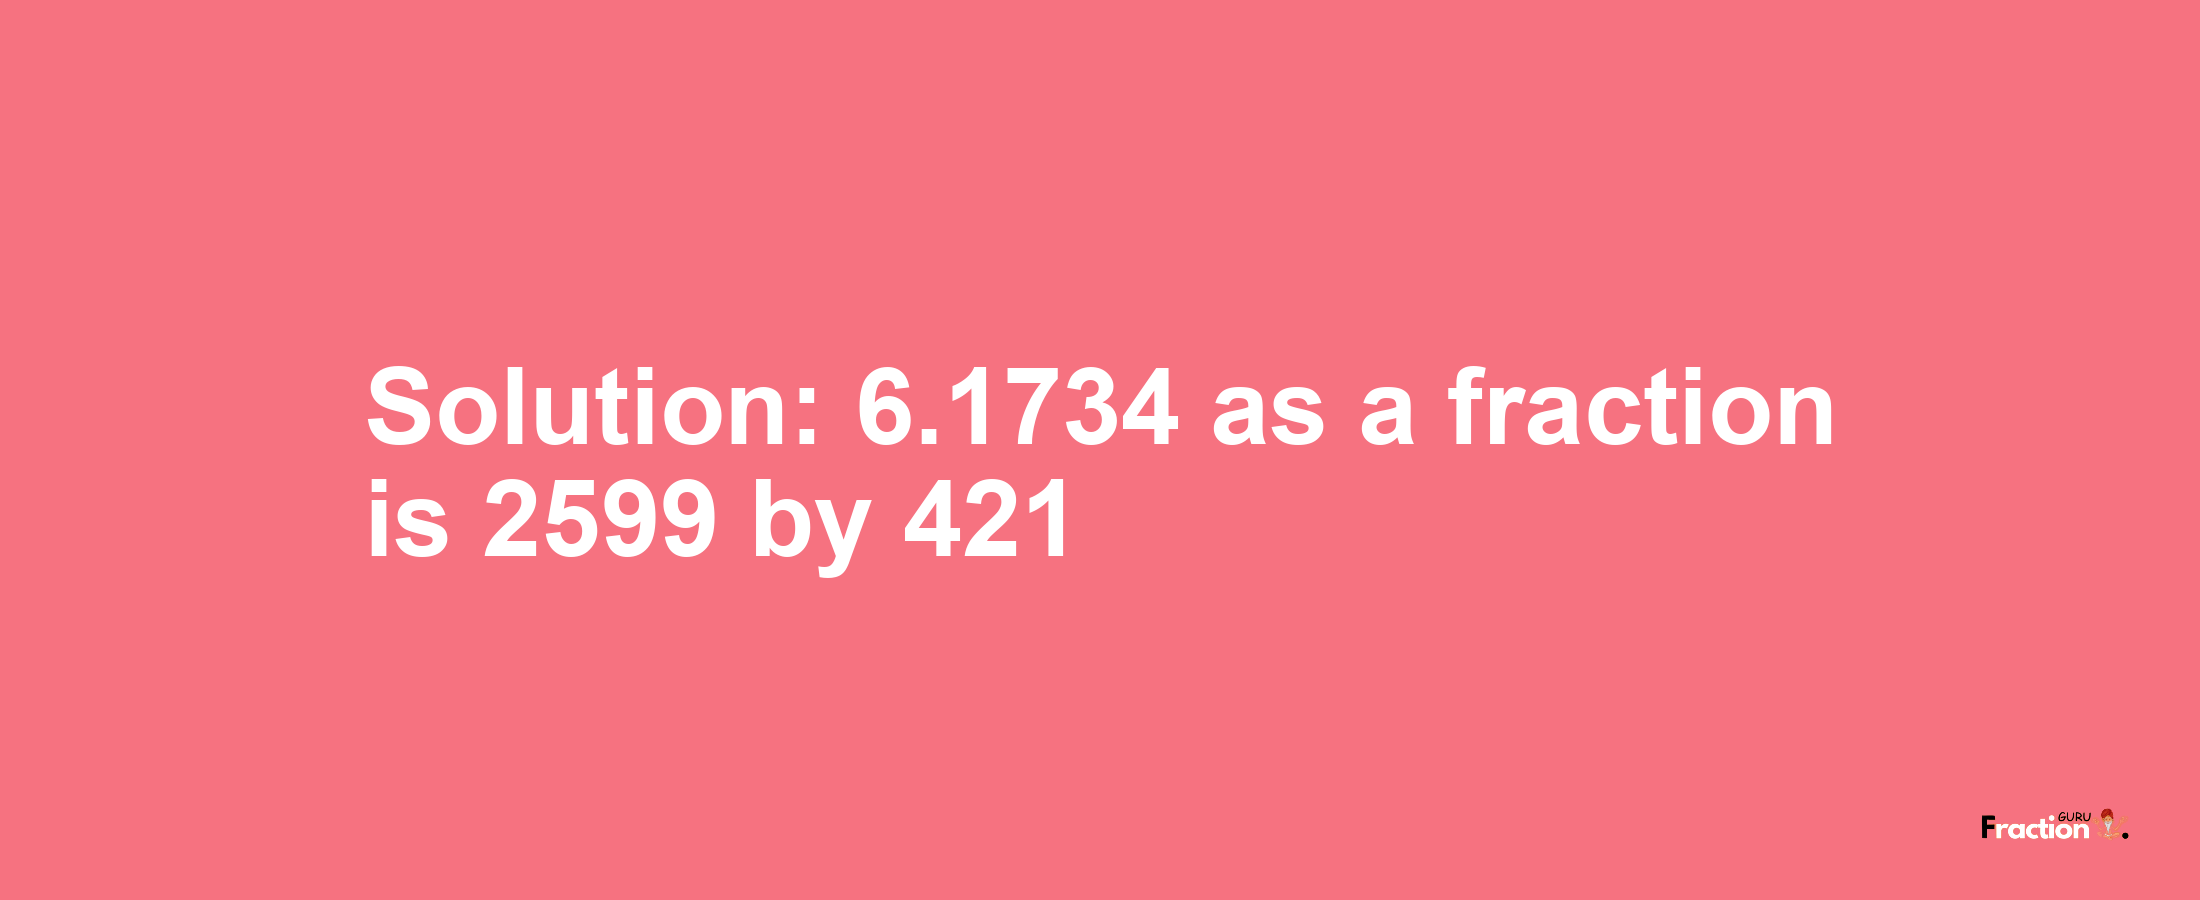 Solution:6.1734 as a fraction is 2599/421